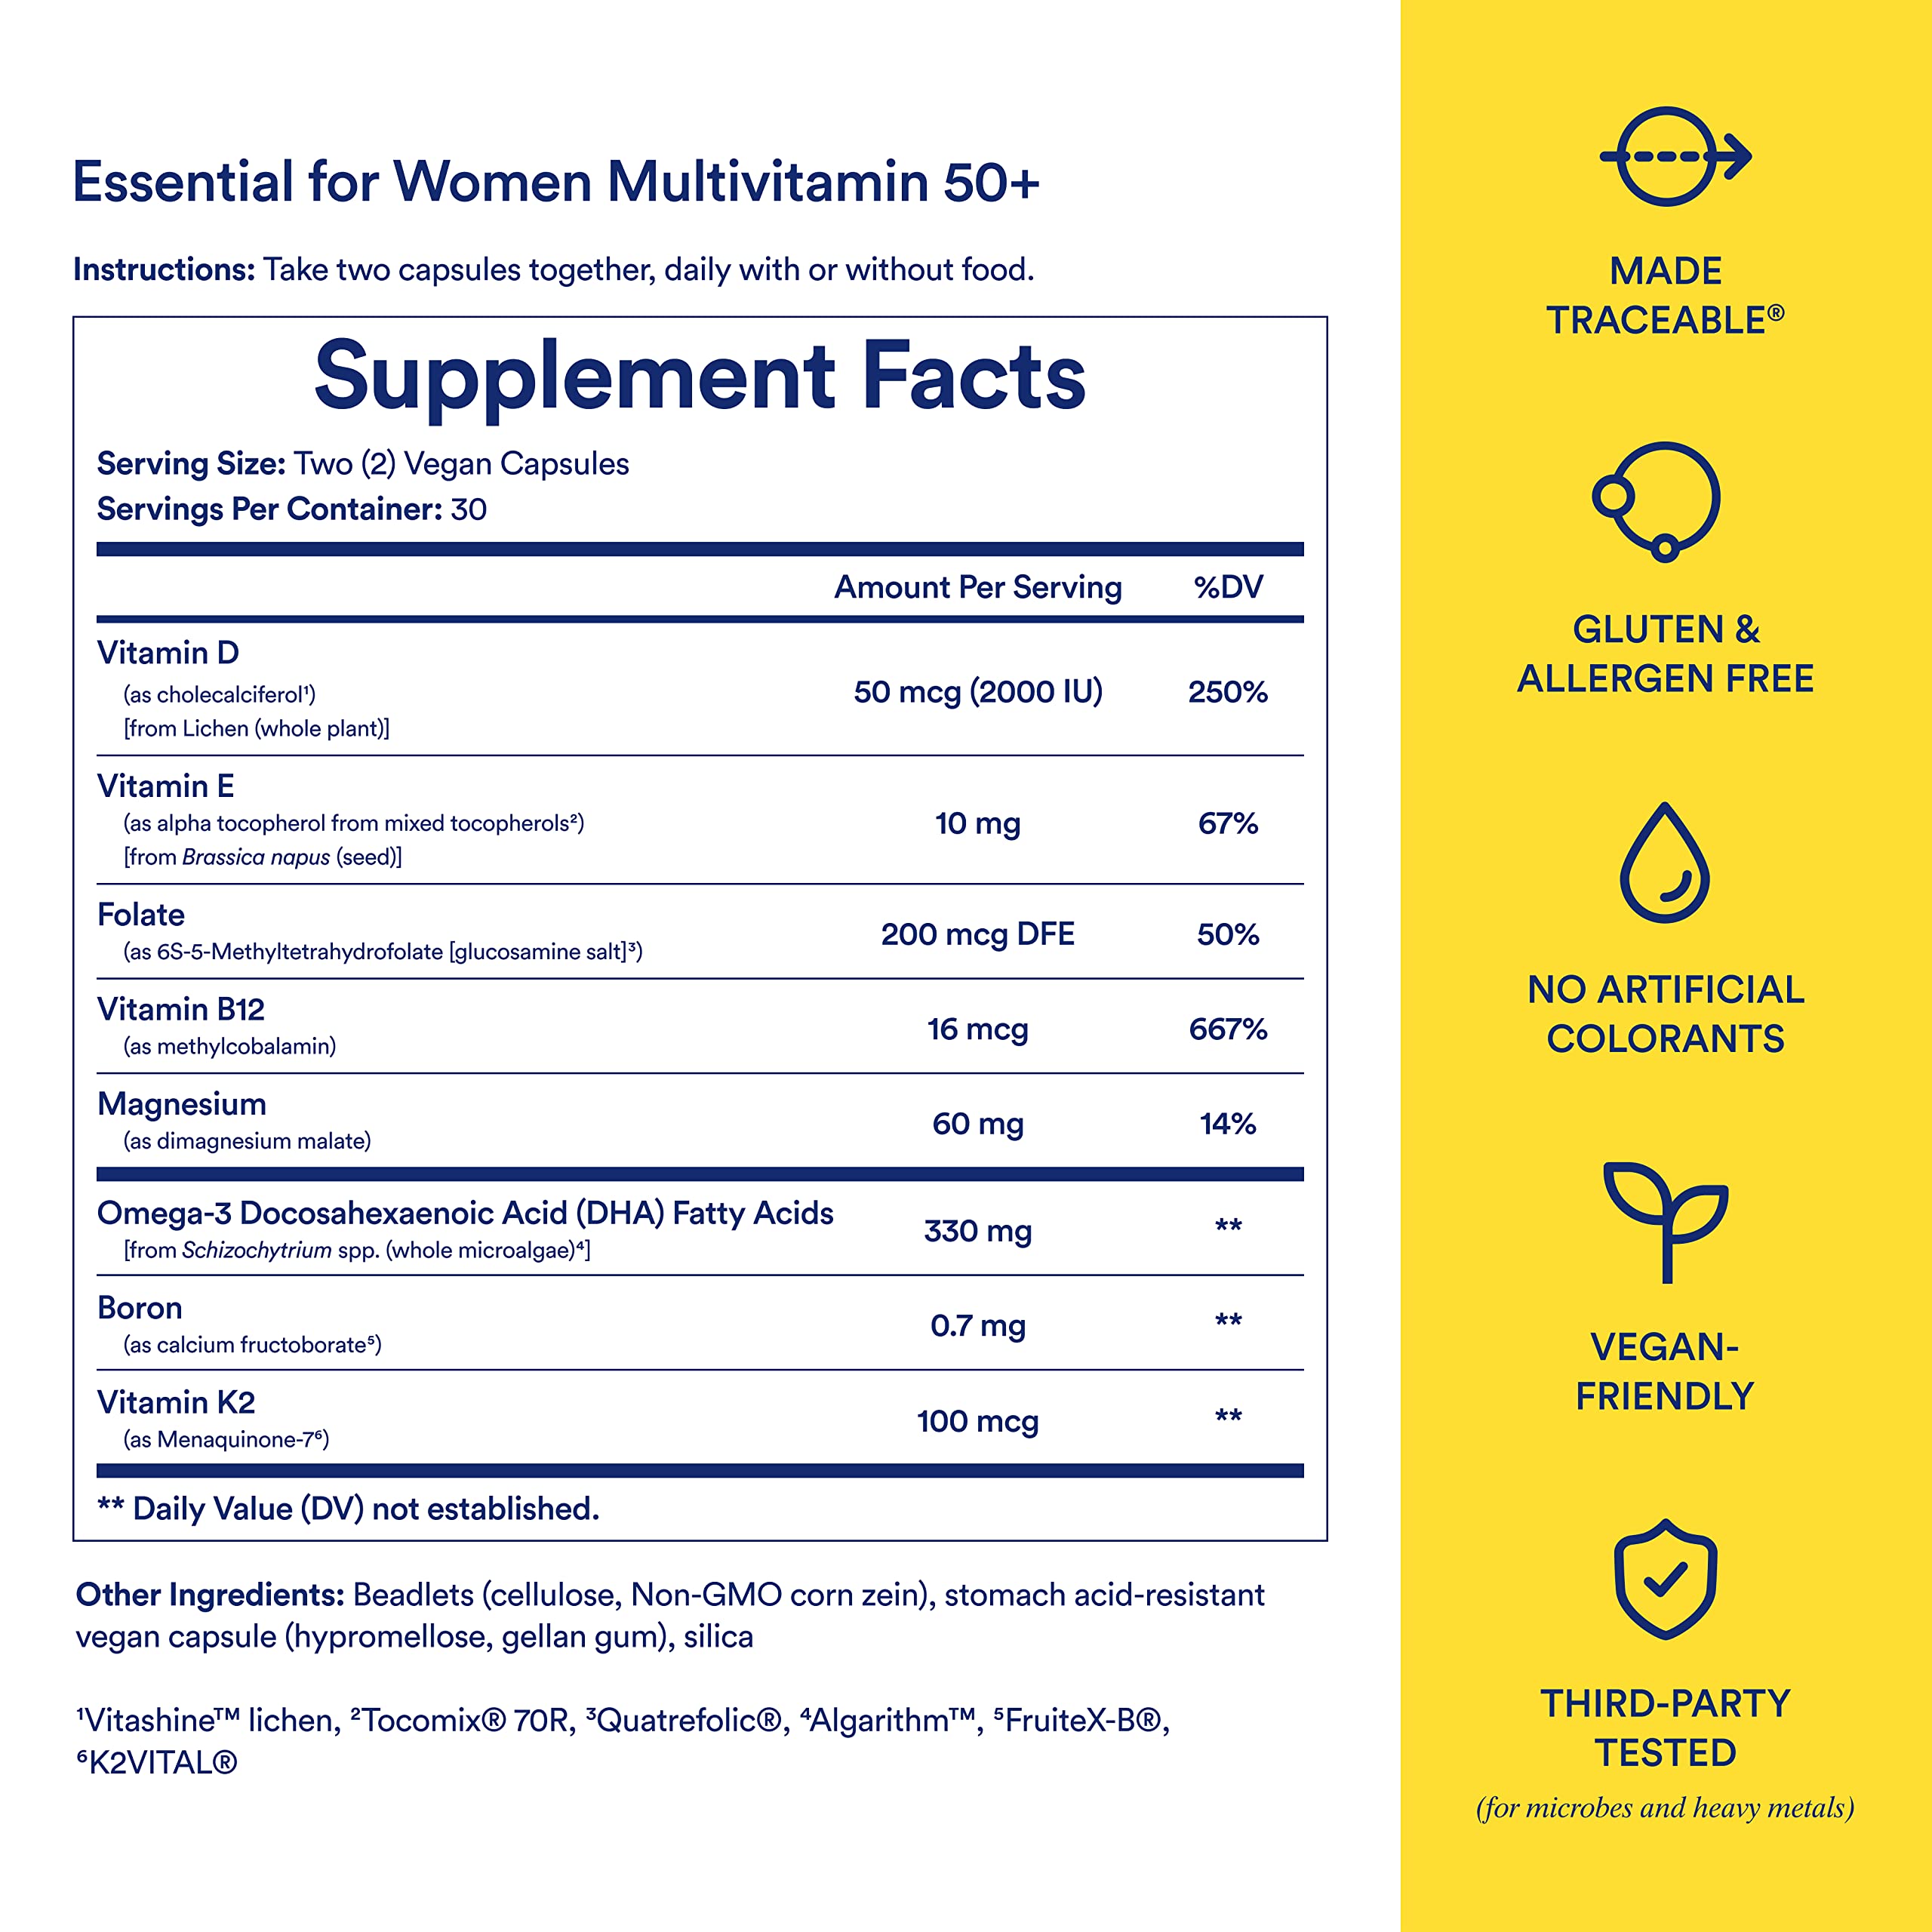 Ritual Multivitamin for Women 50 and Over, Menopause Supplements with Vitamin D3, K2 and Magnesium for Bone Support*, Omega-3 DHA, Vitamin B12, Non-GMO, Mint Essenced, 30 Day Supply, 60 Vegan Capsules